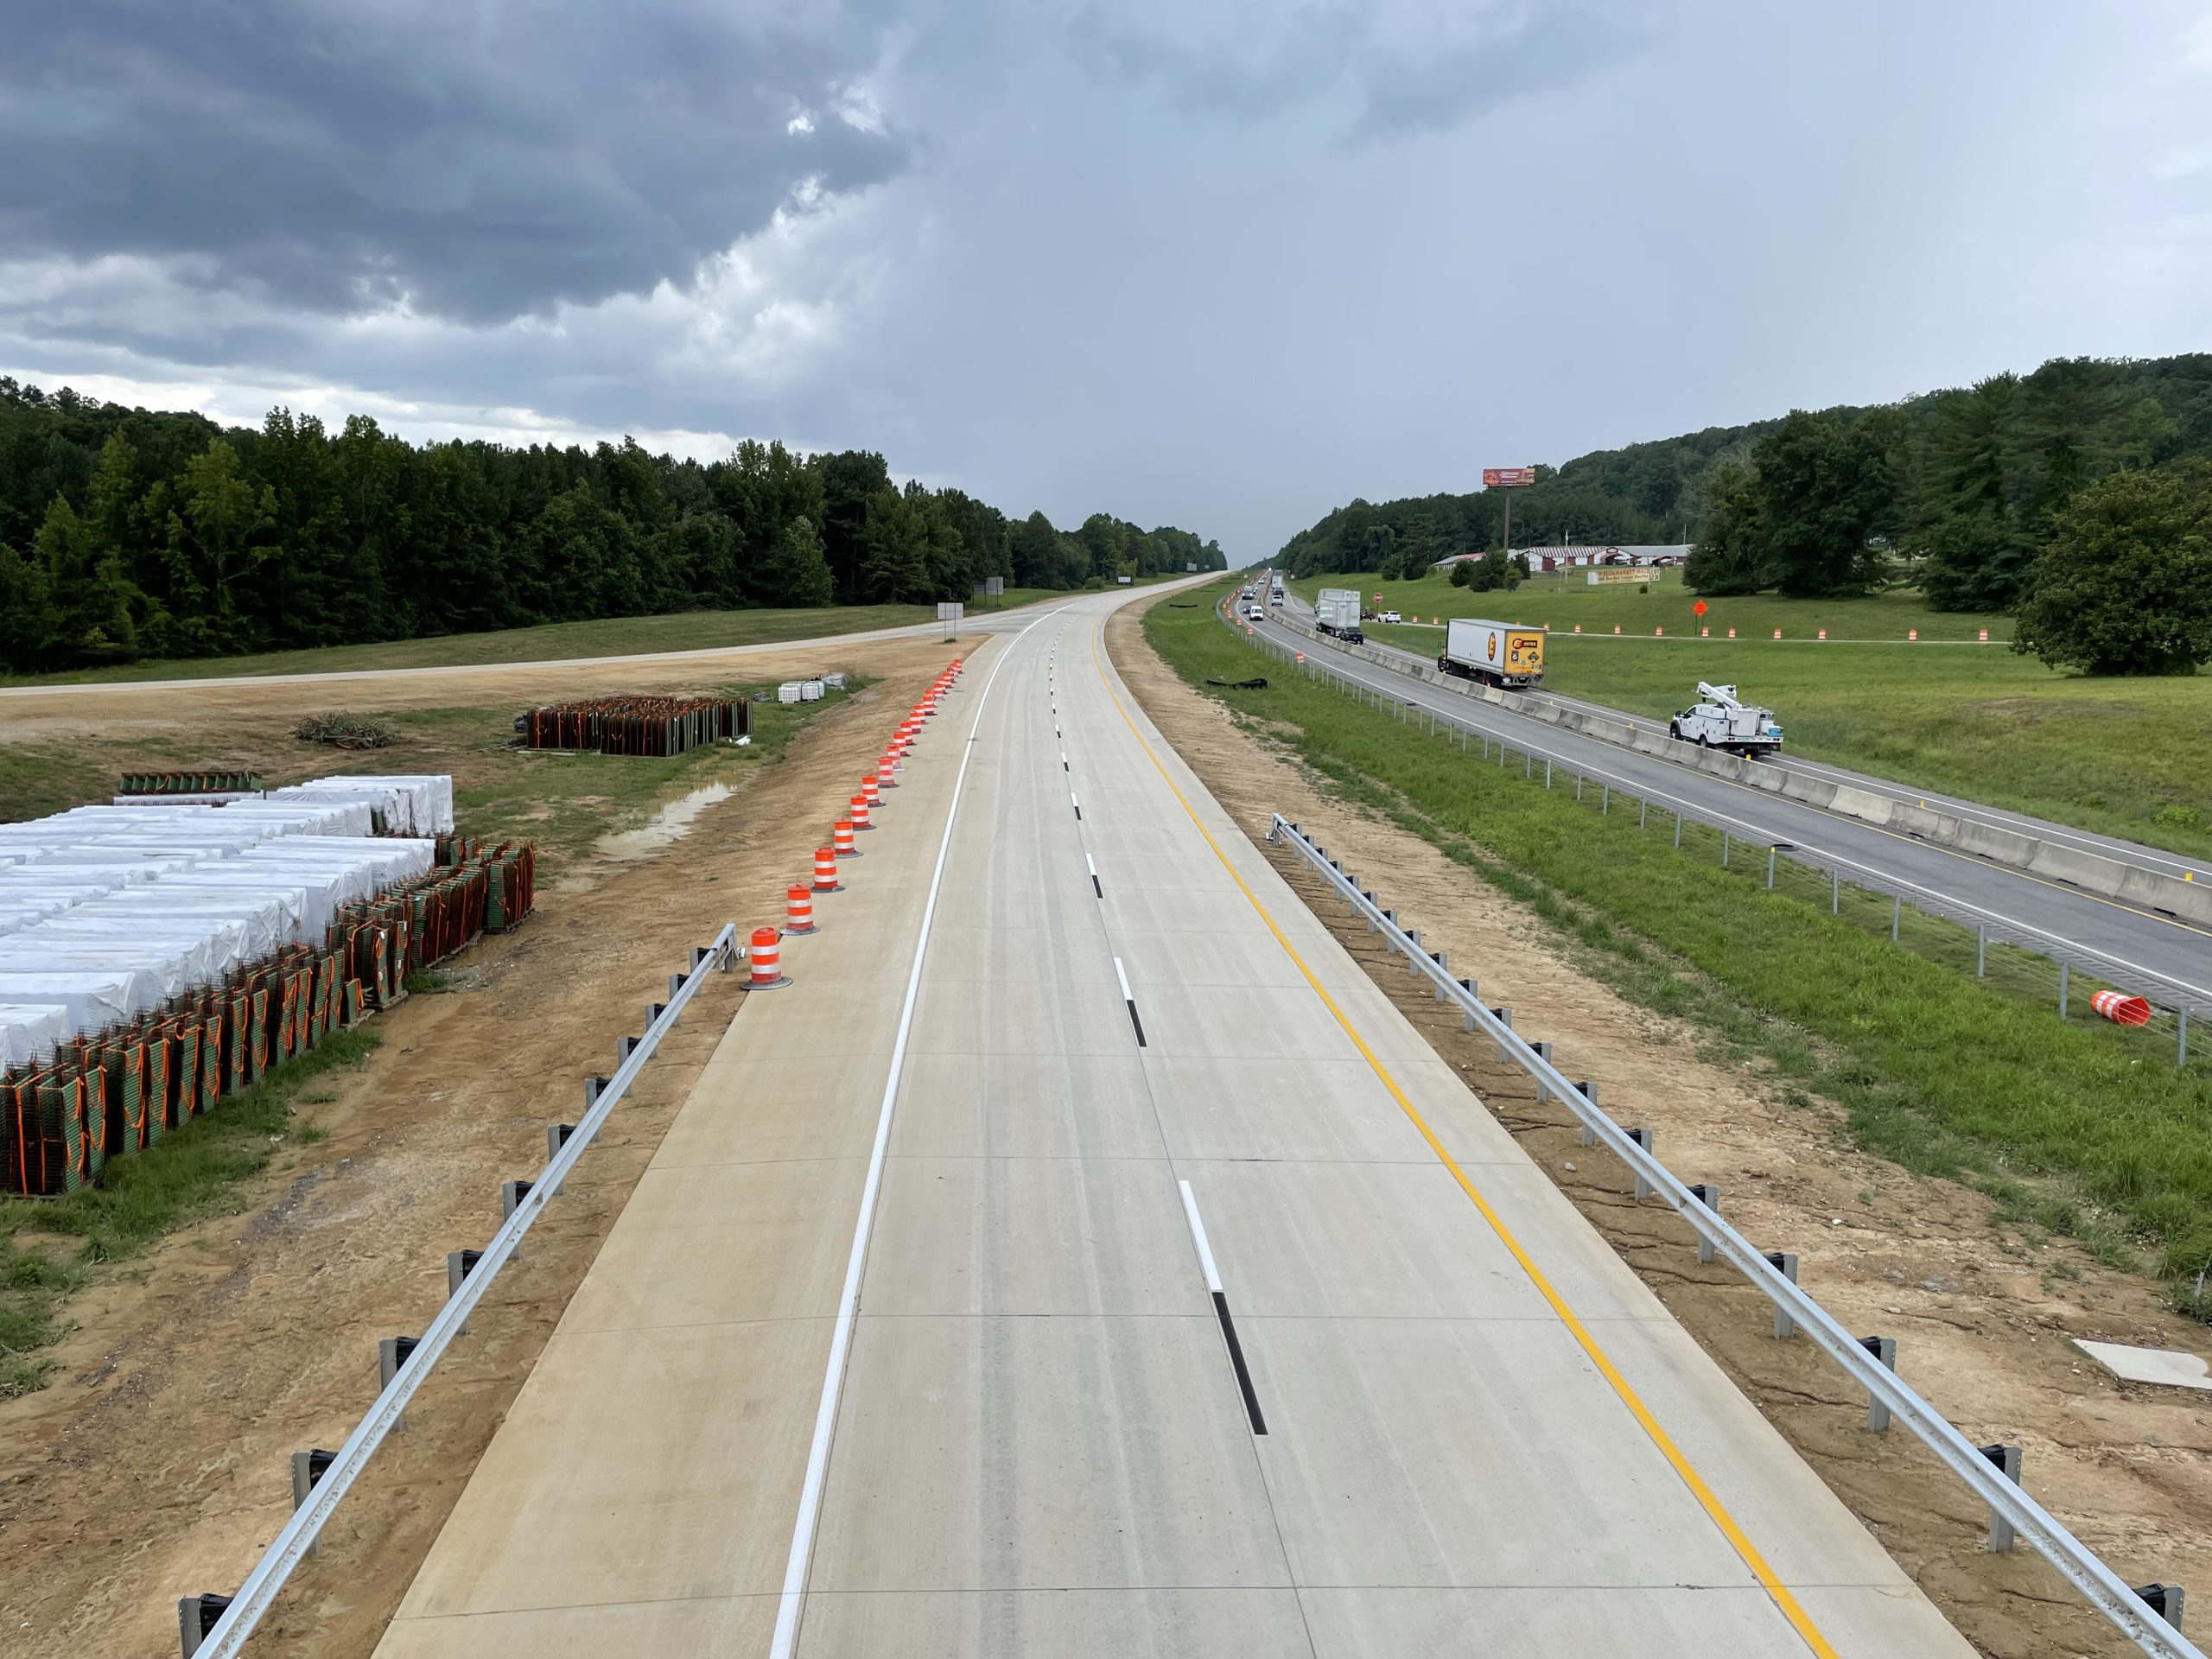 An empty concrete roadway prior to being opened to traffic. Two-way traffic can be seen on the nearby southbound roadway.